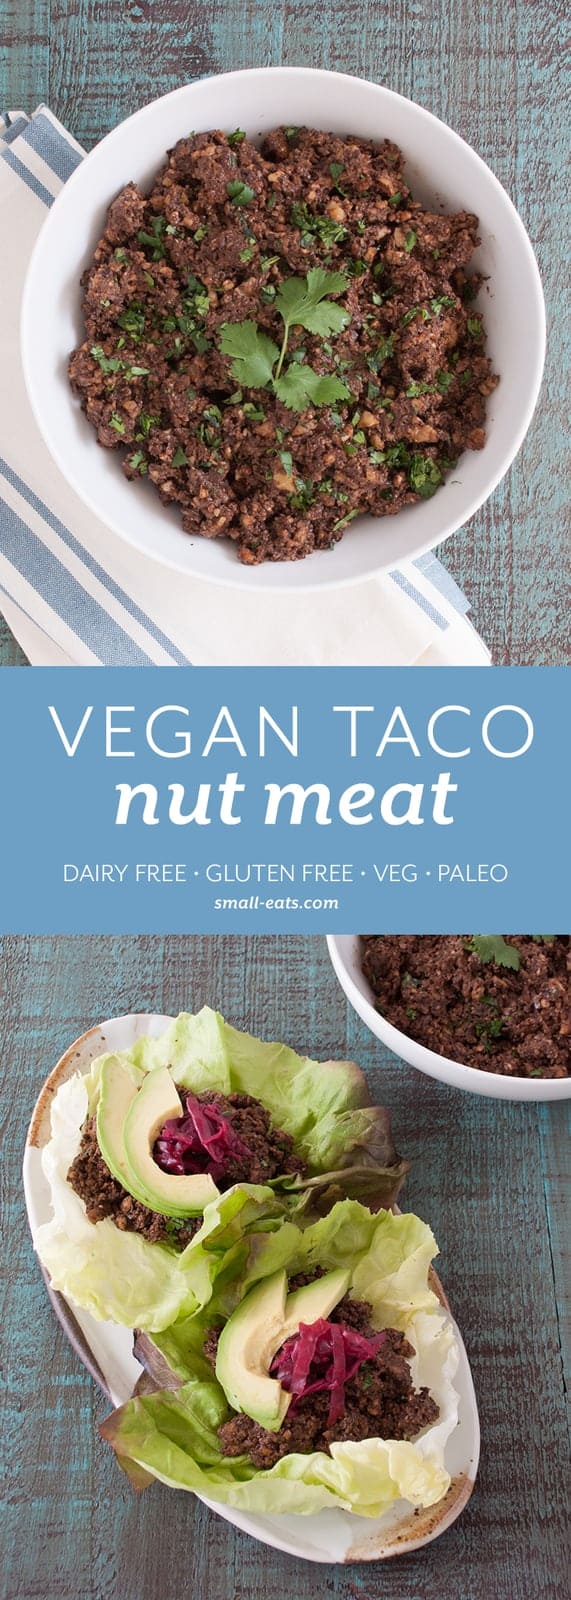 Make a simple taco meat that works for meat eaters and vegetarians alike. | Vegan Taco Nut Meat from small-eats.com 